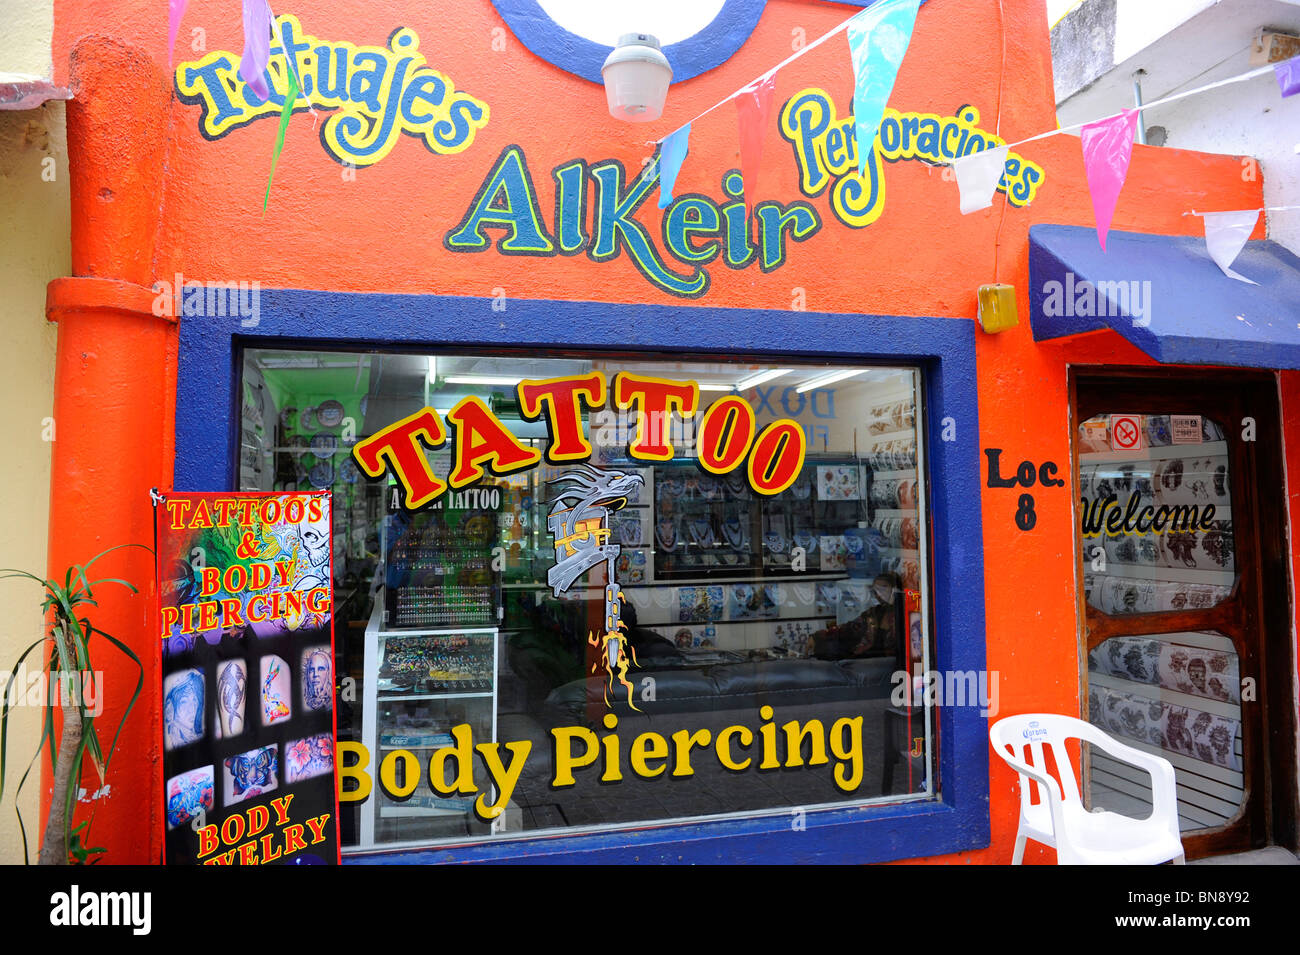 Tattoo and body piercing Shop near Caribbean Cruise Ship in Cozumel Mexico  Stock Photo - Alamy